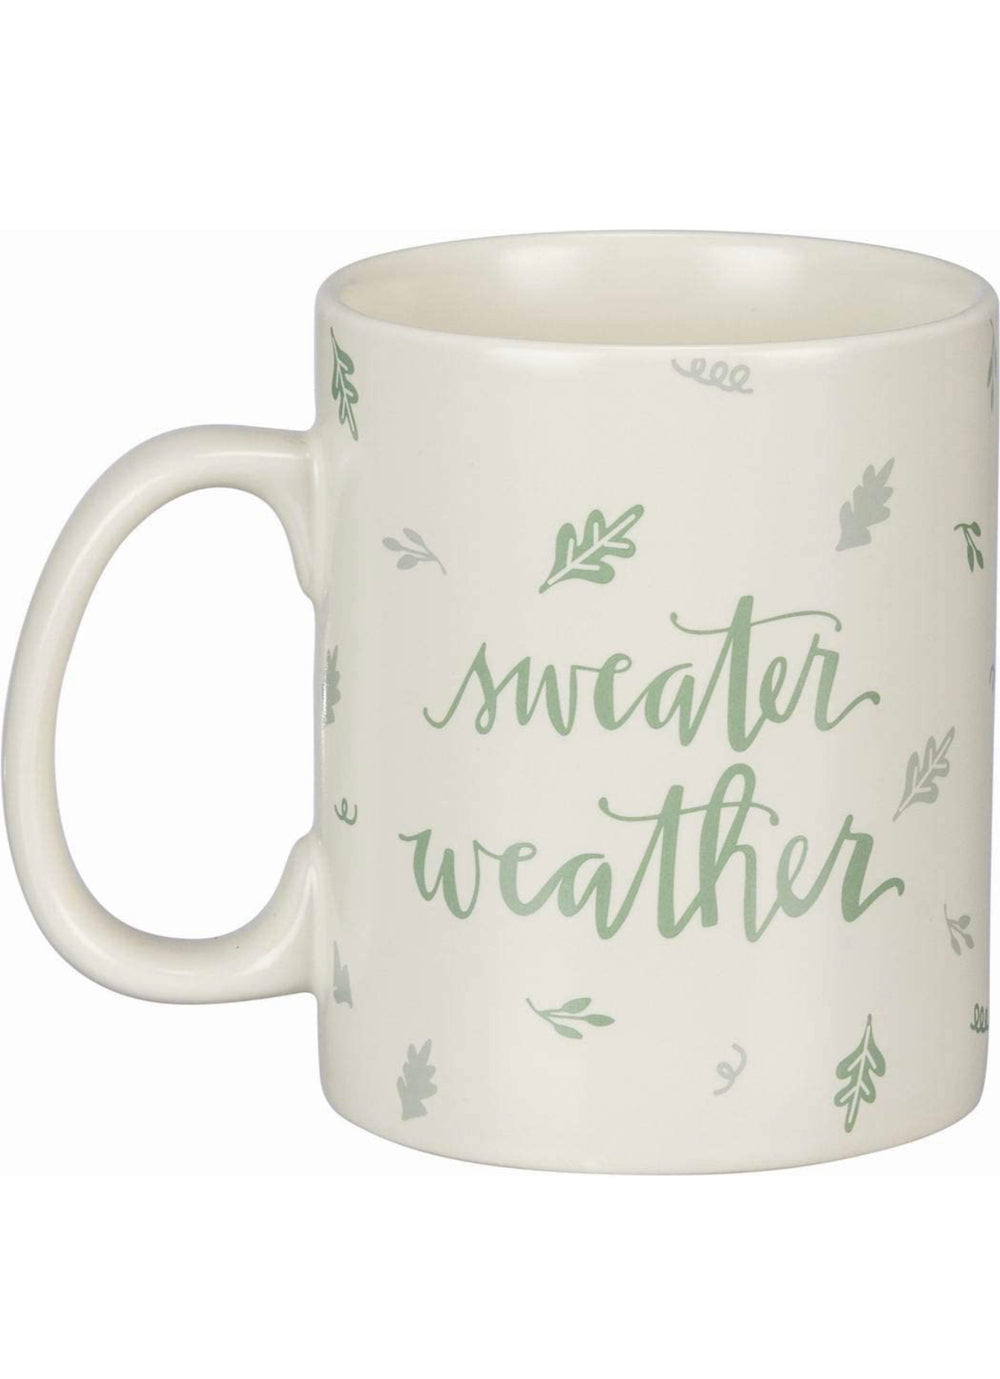 Sweater Weather Coffee Mug - The Teal Antler Boutique